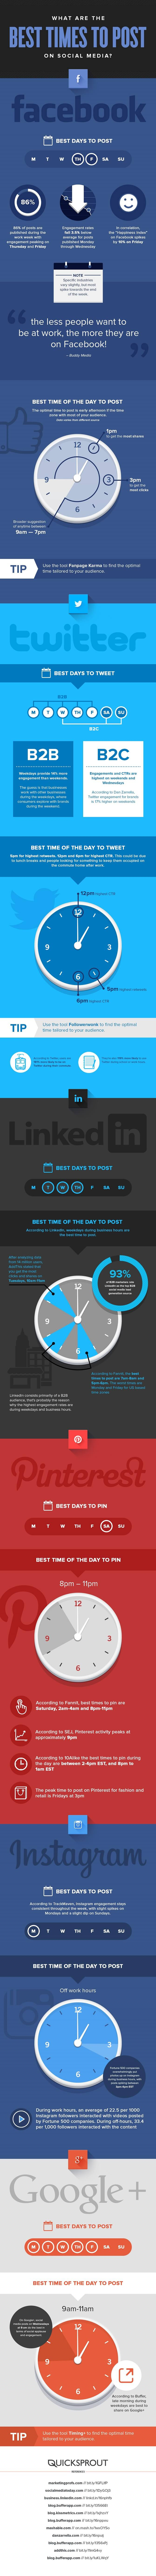 when to post on social media